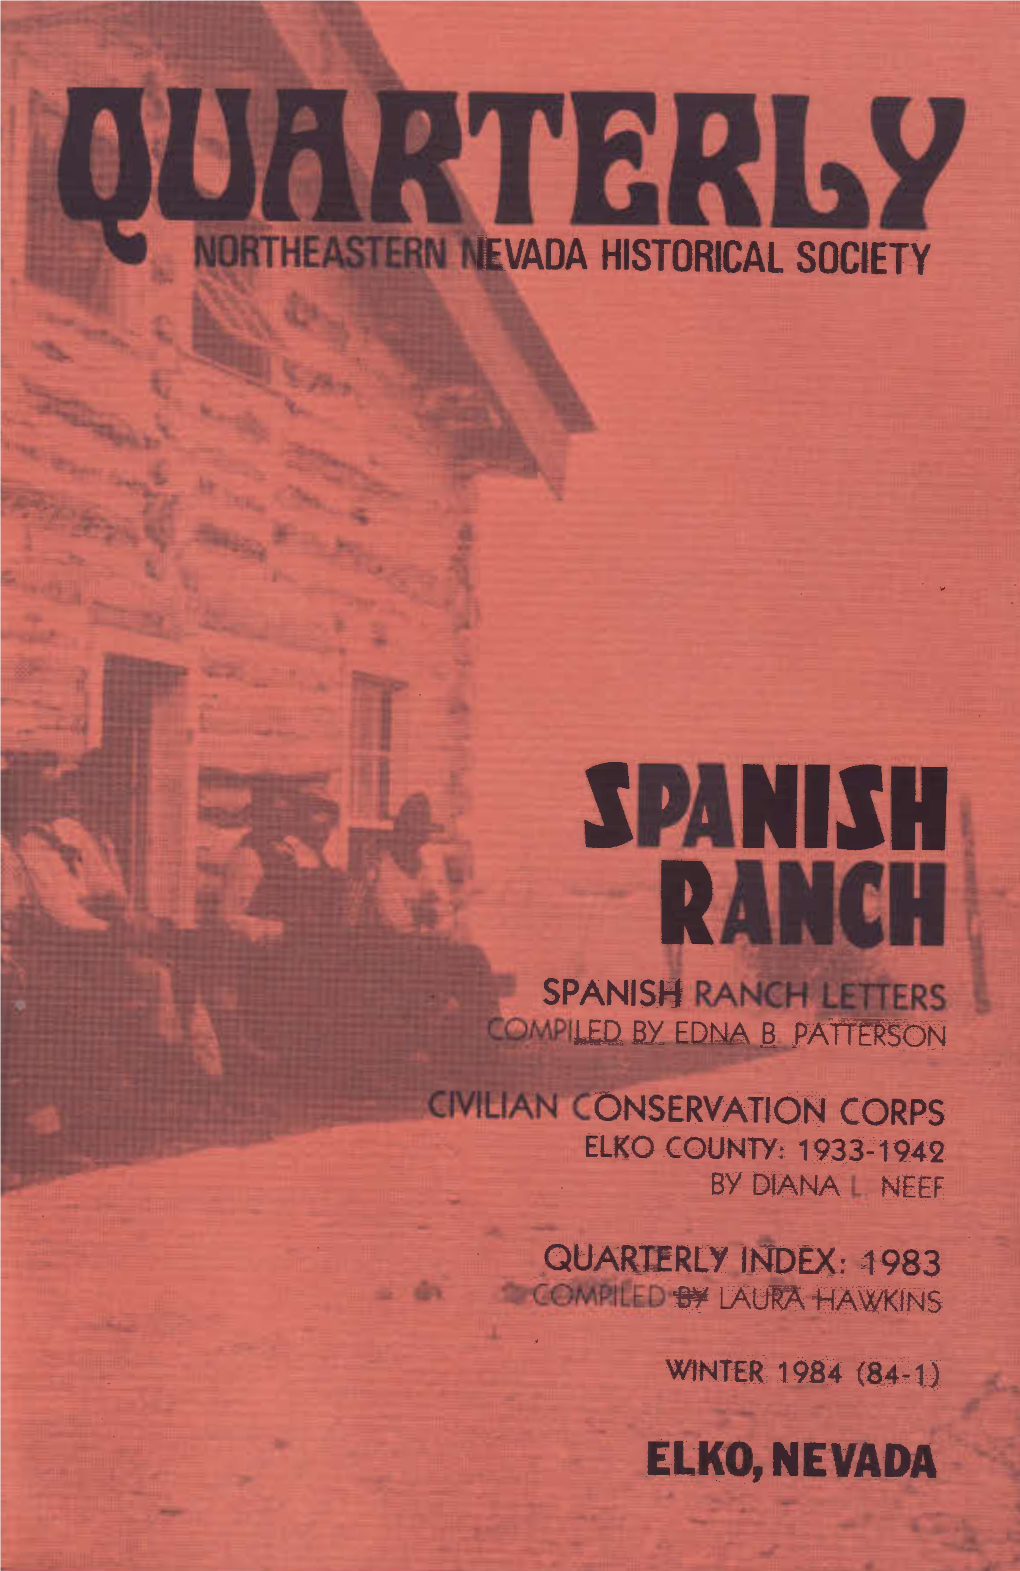 "Civilian Conservation Corps, Elko County: 1933-1944" by Diana L. Neef (NNHS Quarterly 84.1)